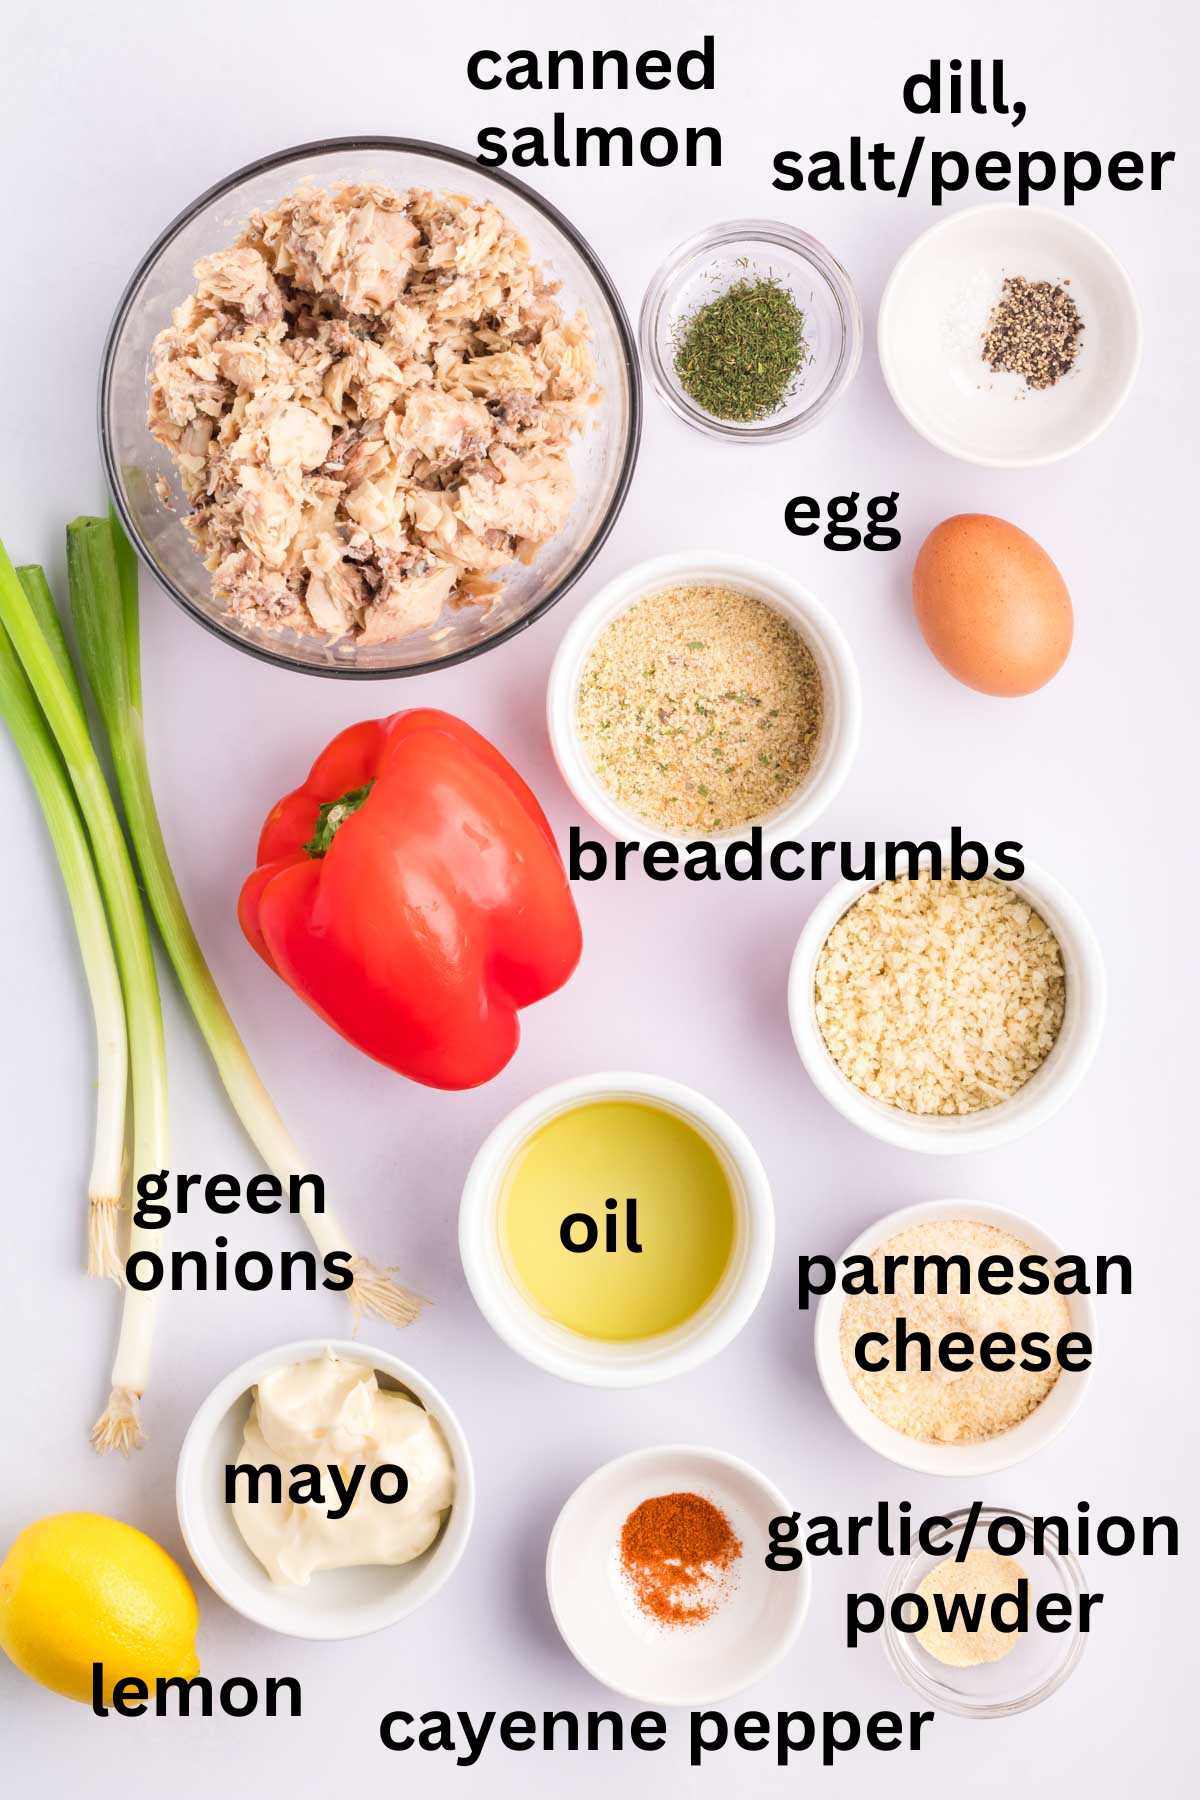 Ingredients to make salmon cakes with canned salmon.